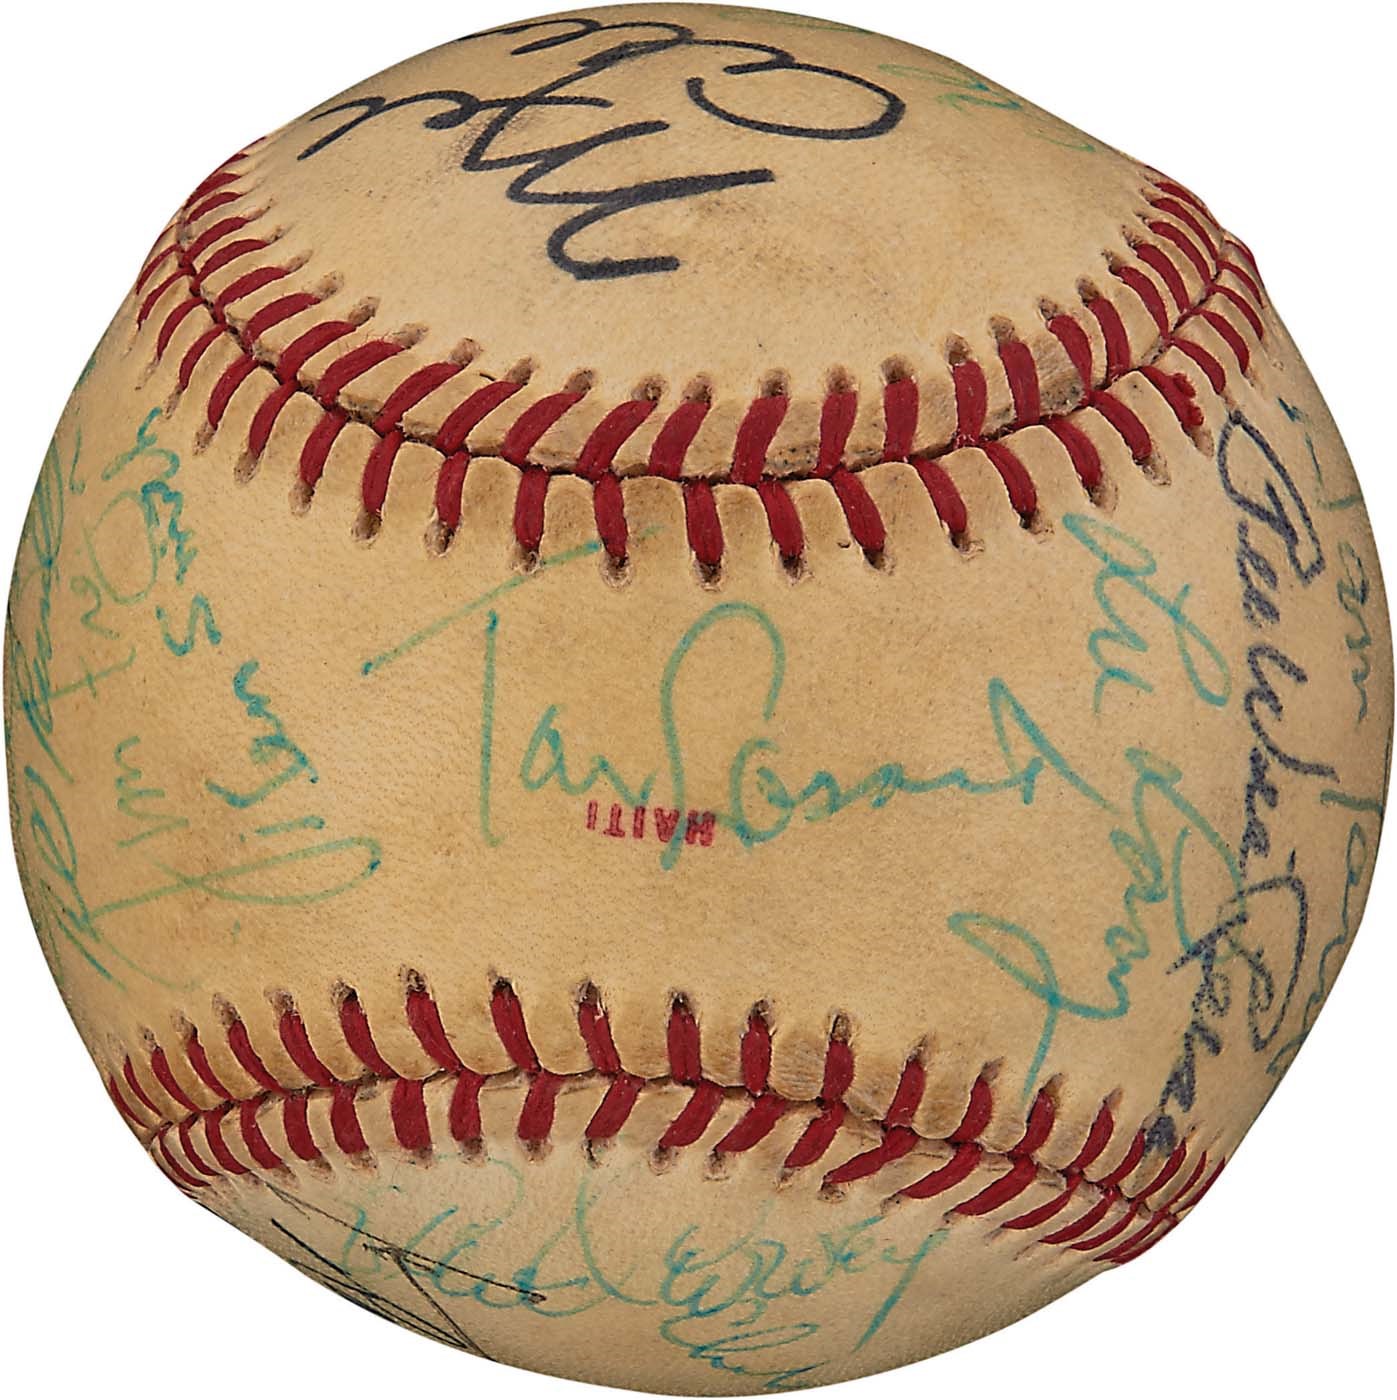 NY Yankees, Giants & Mets - 1978 World Series Signed Game Used Baseball w/Honorable Attendees (PSA & SGC)